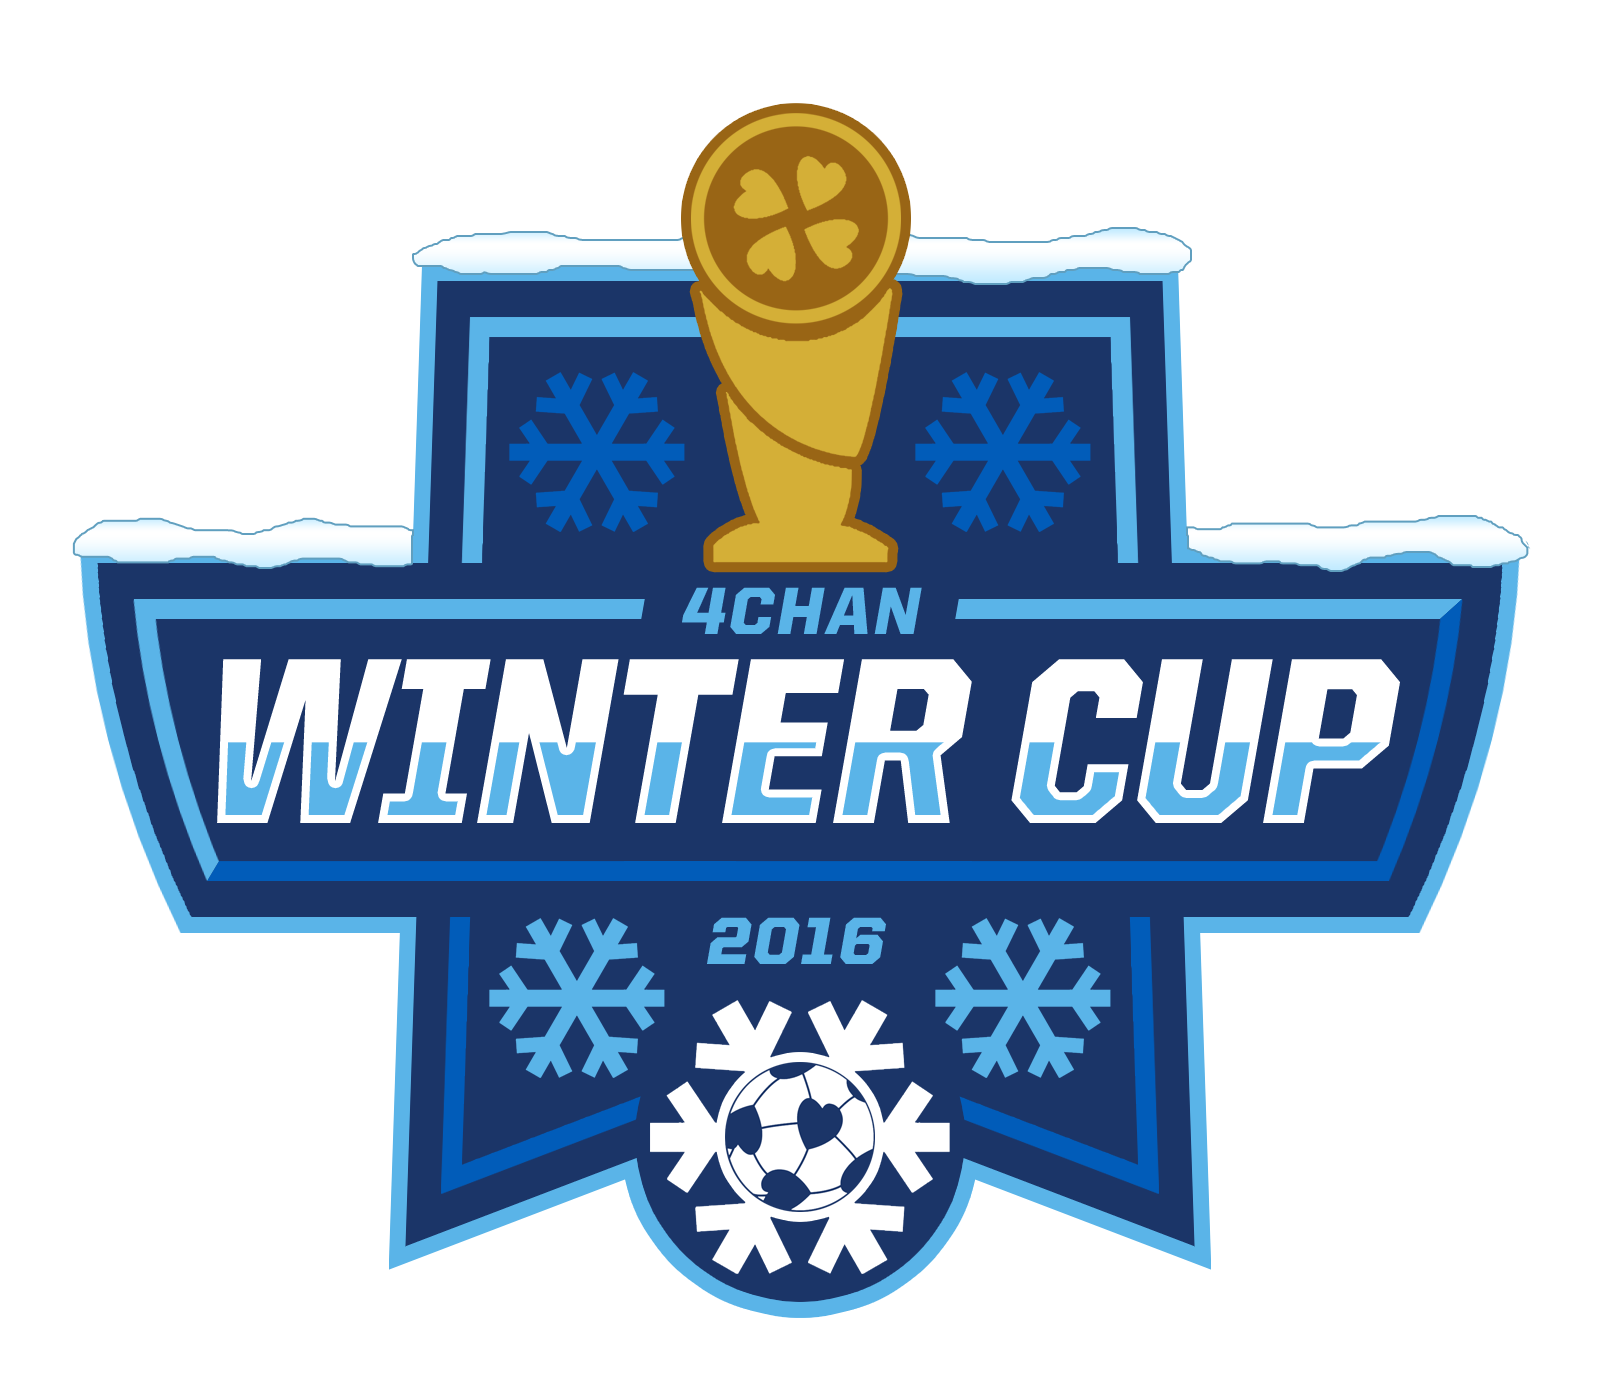 2016 4chan Winter Cup